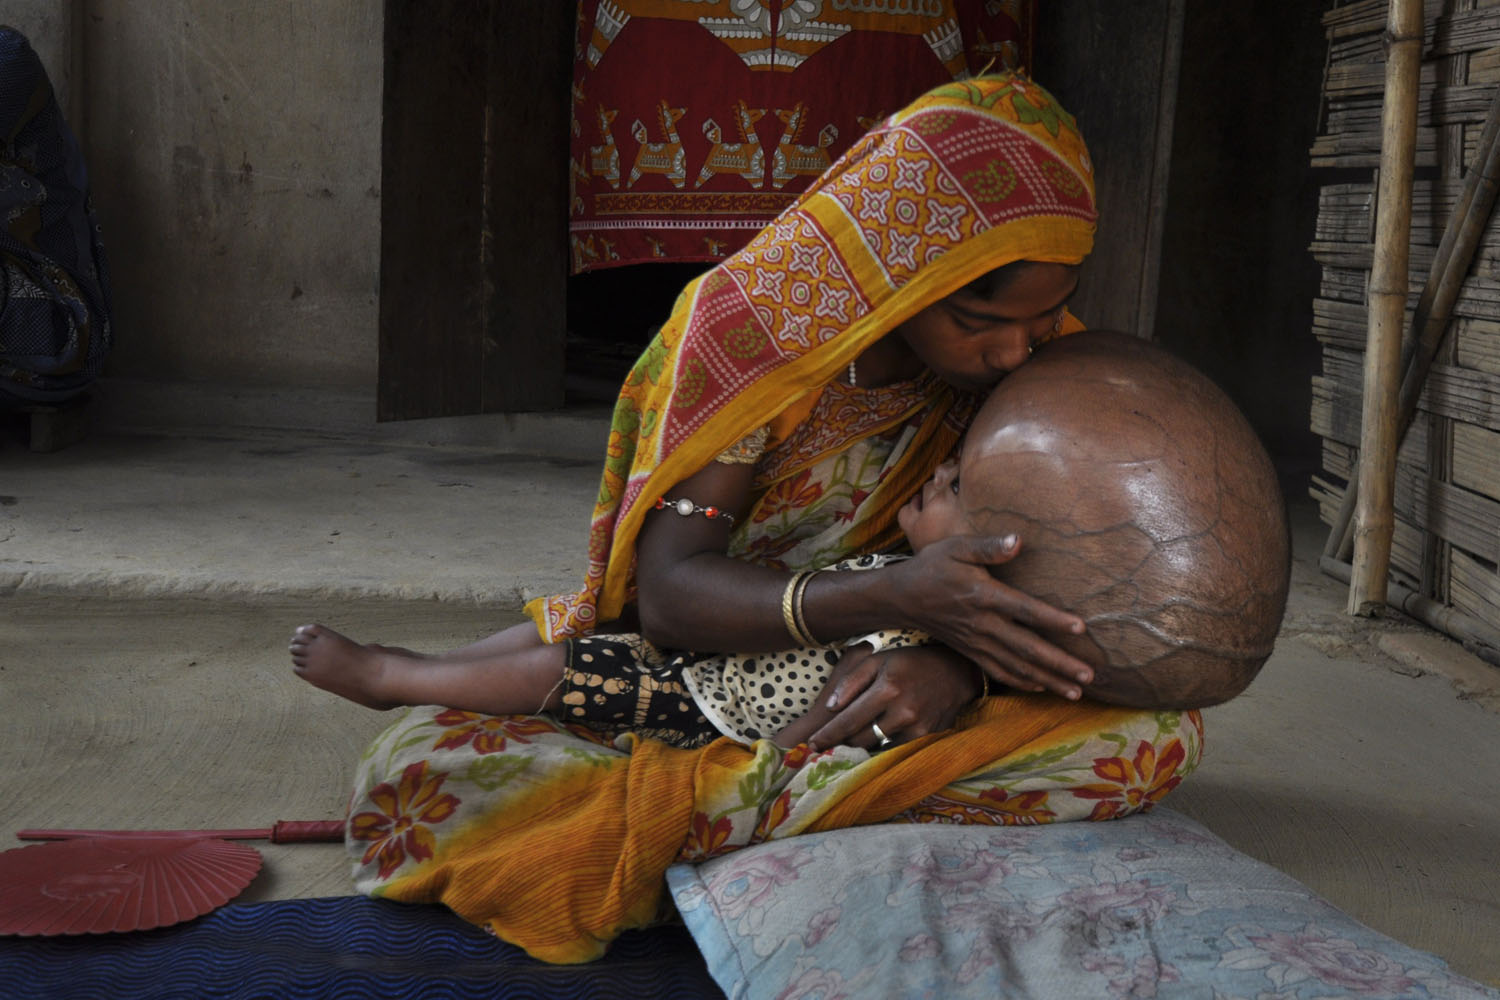 April 13, 2013. Fatima Khatun 25, kisses the head of her eighteen month old daughter, Roona Begum, suffering from Hydrocephalus, in which cerebrospinal fluid builds up in the brain, at their hut in Jirania village on the outskirts of Agartala, the capital of northeastern state of Tripura.